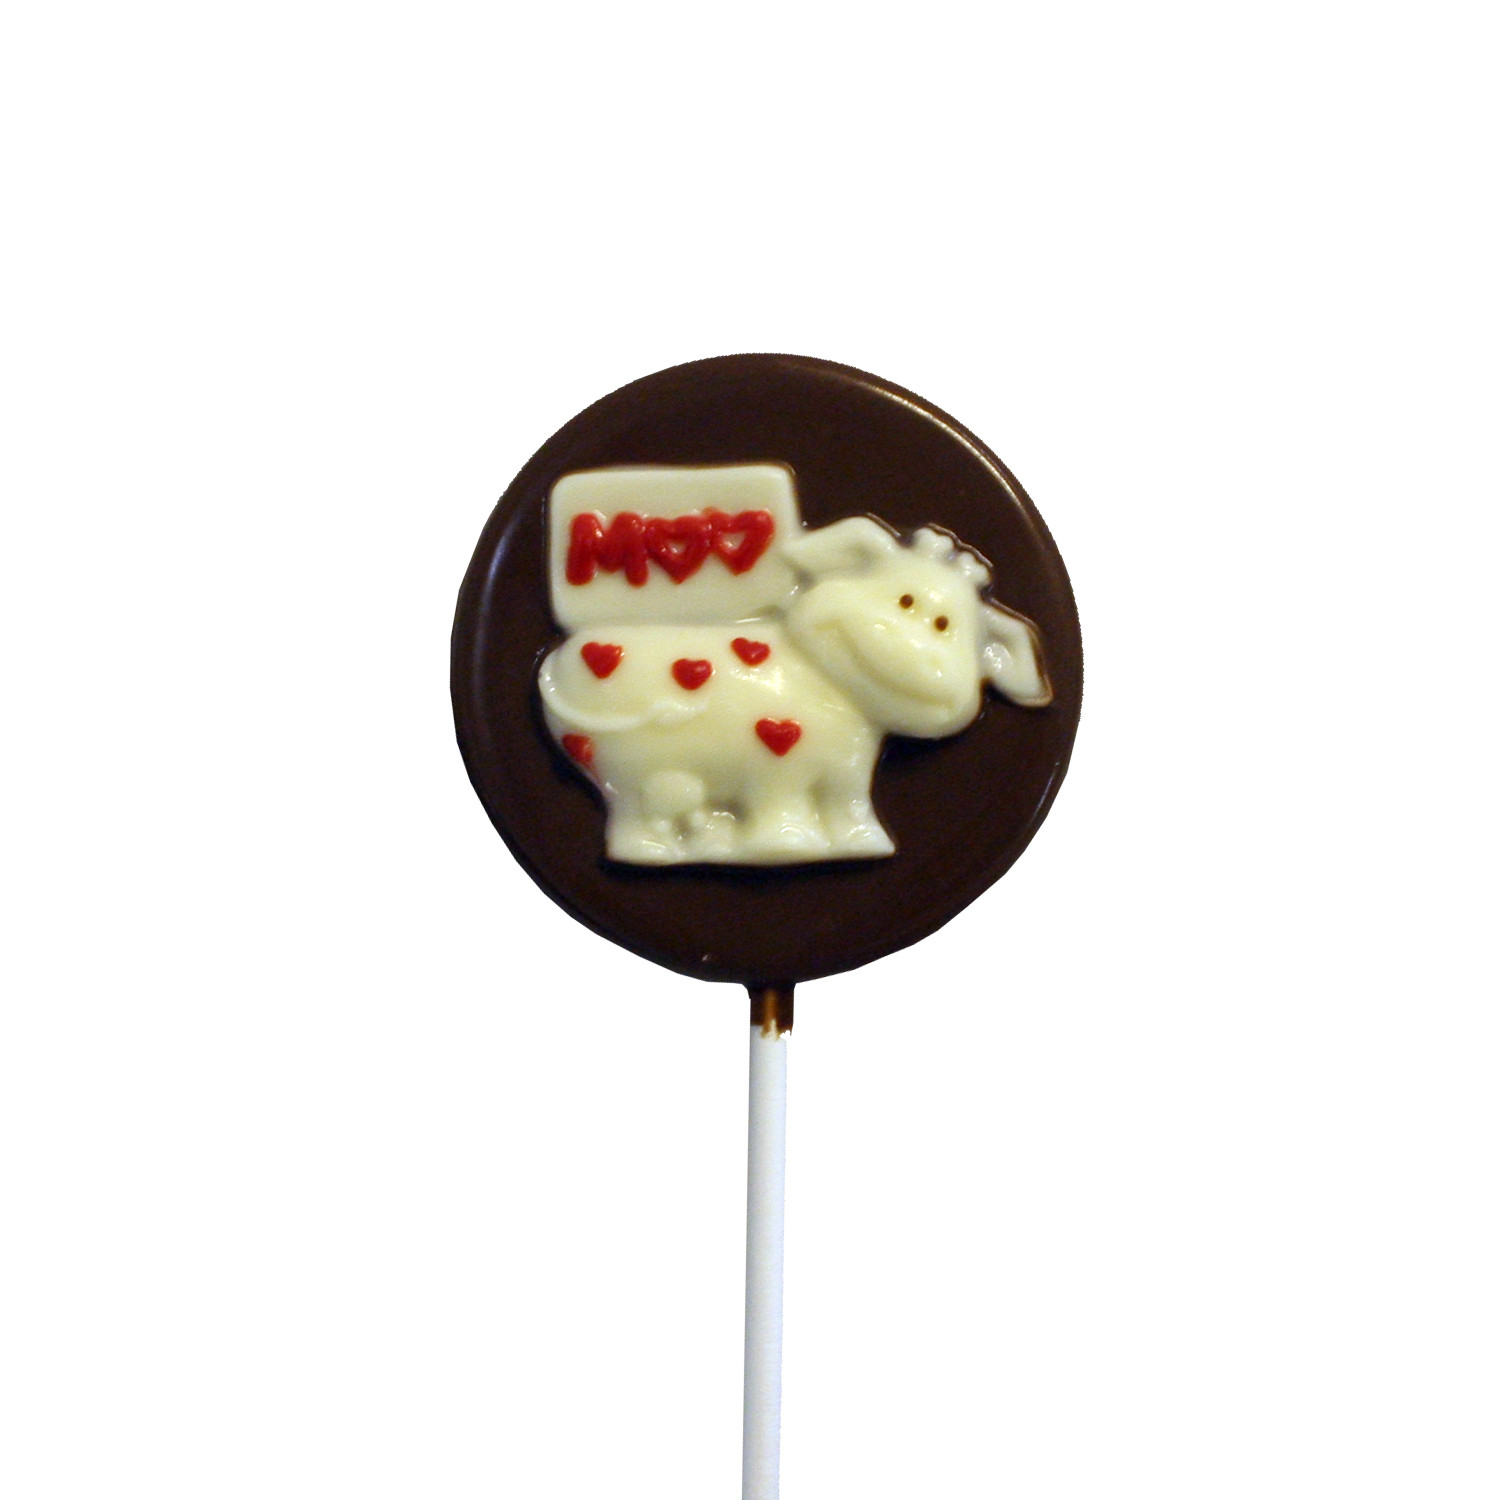 Chocolate Lollipops (Pollylops® Moo Cow)